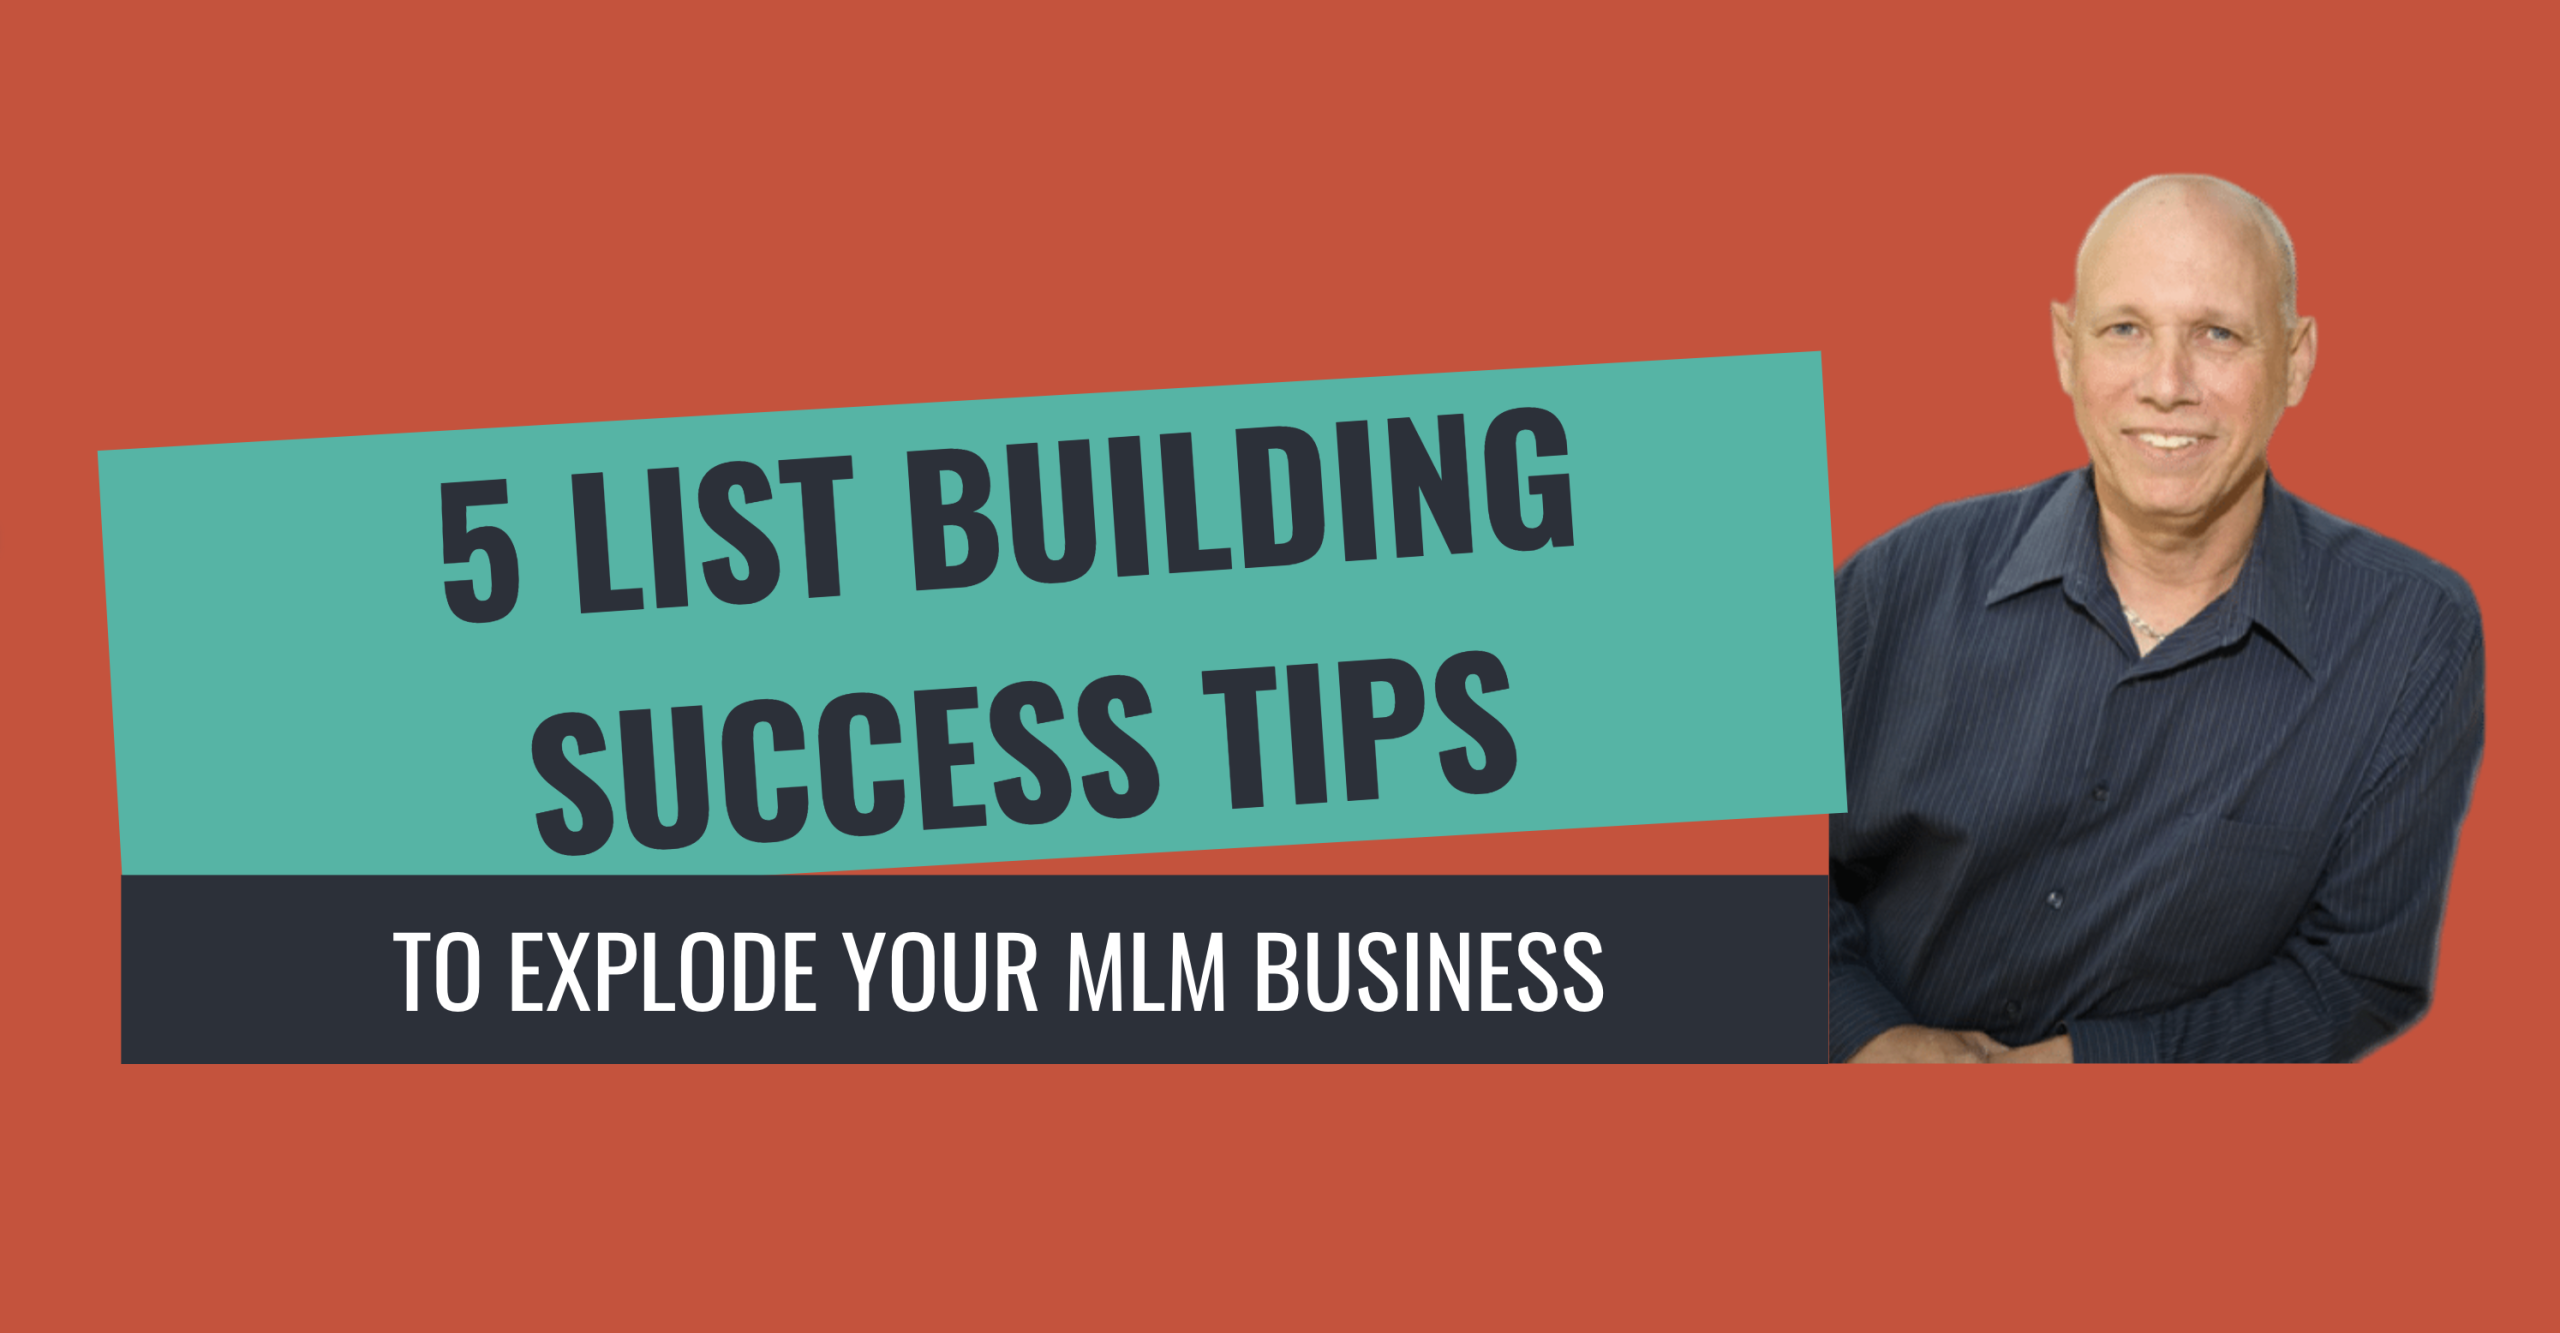 5 List Building Success Tips To Explode Your Network Marketing Business